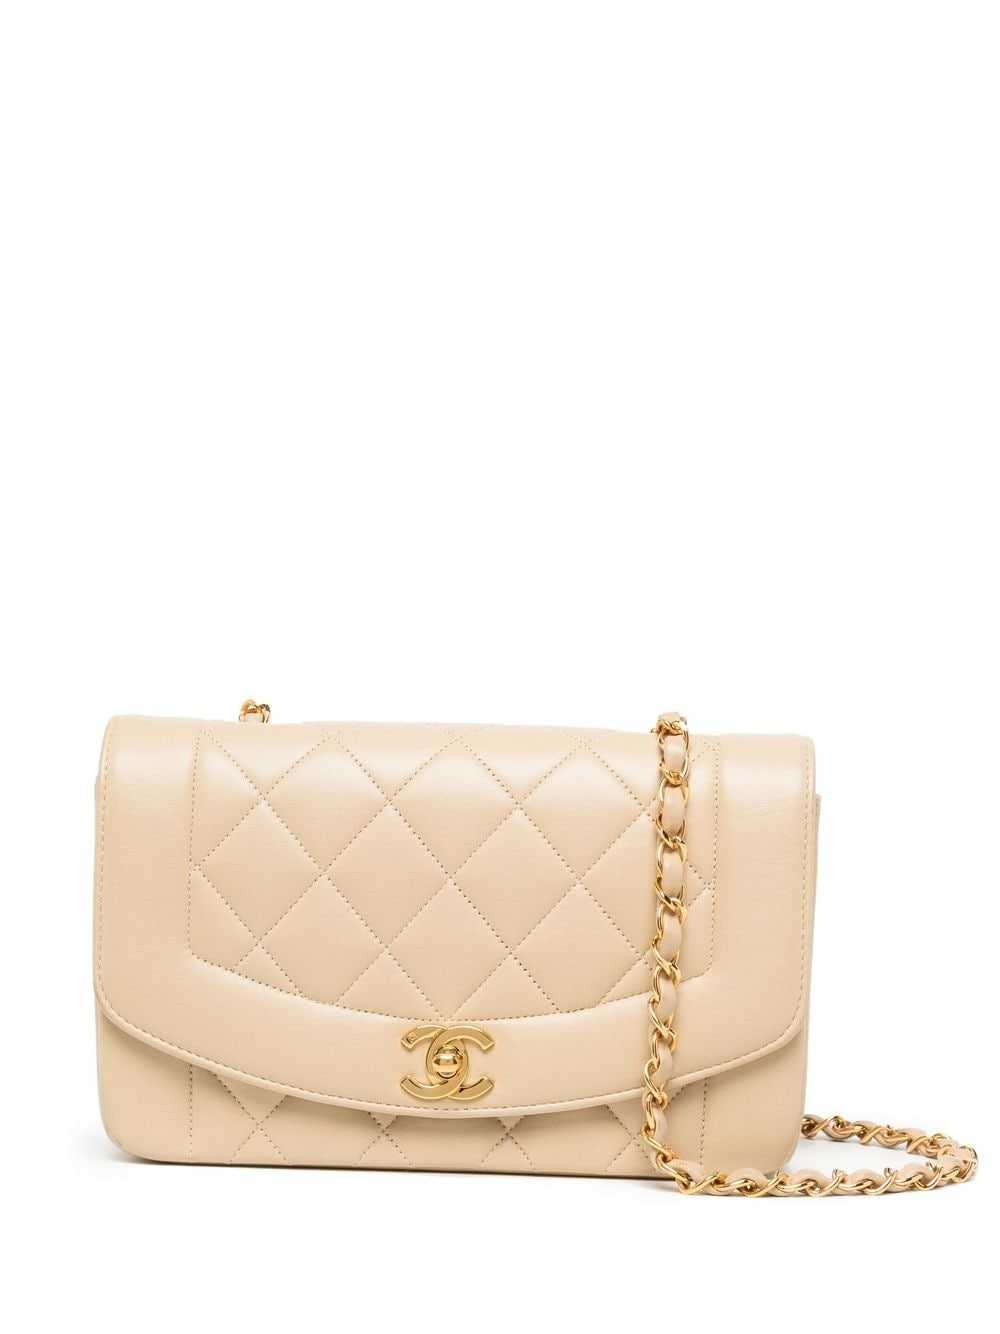 Chanel pre-owned 1994-1996 small - Gem